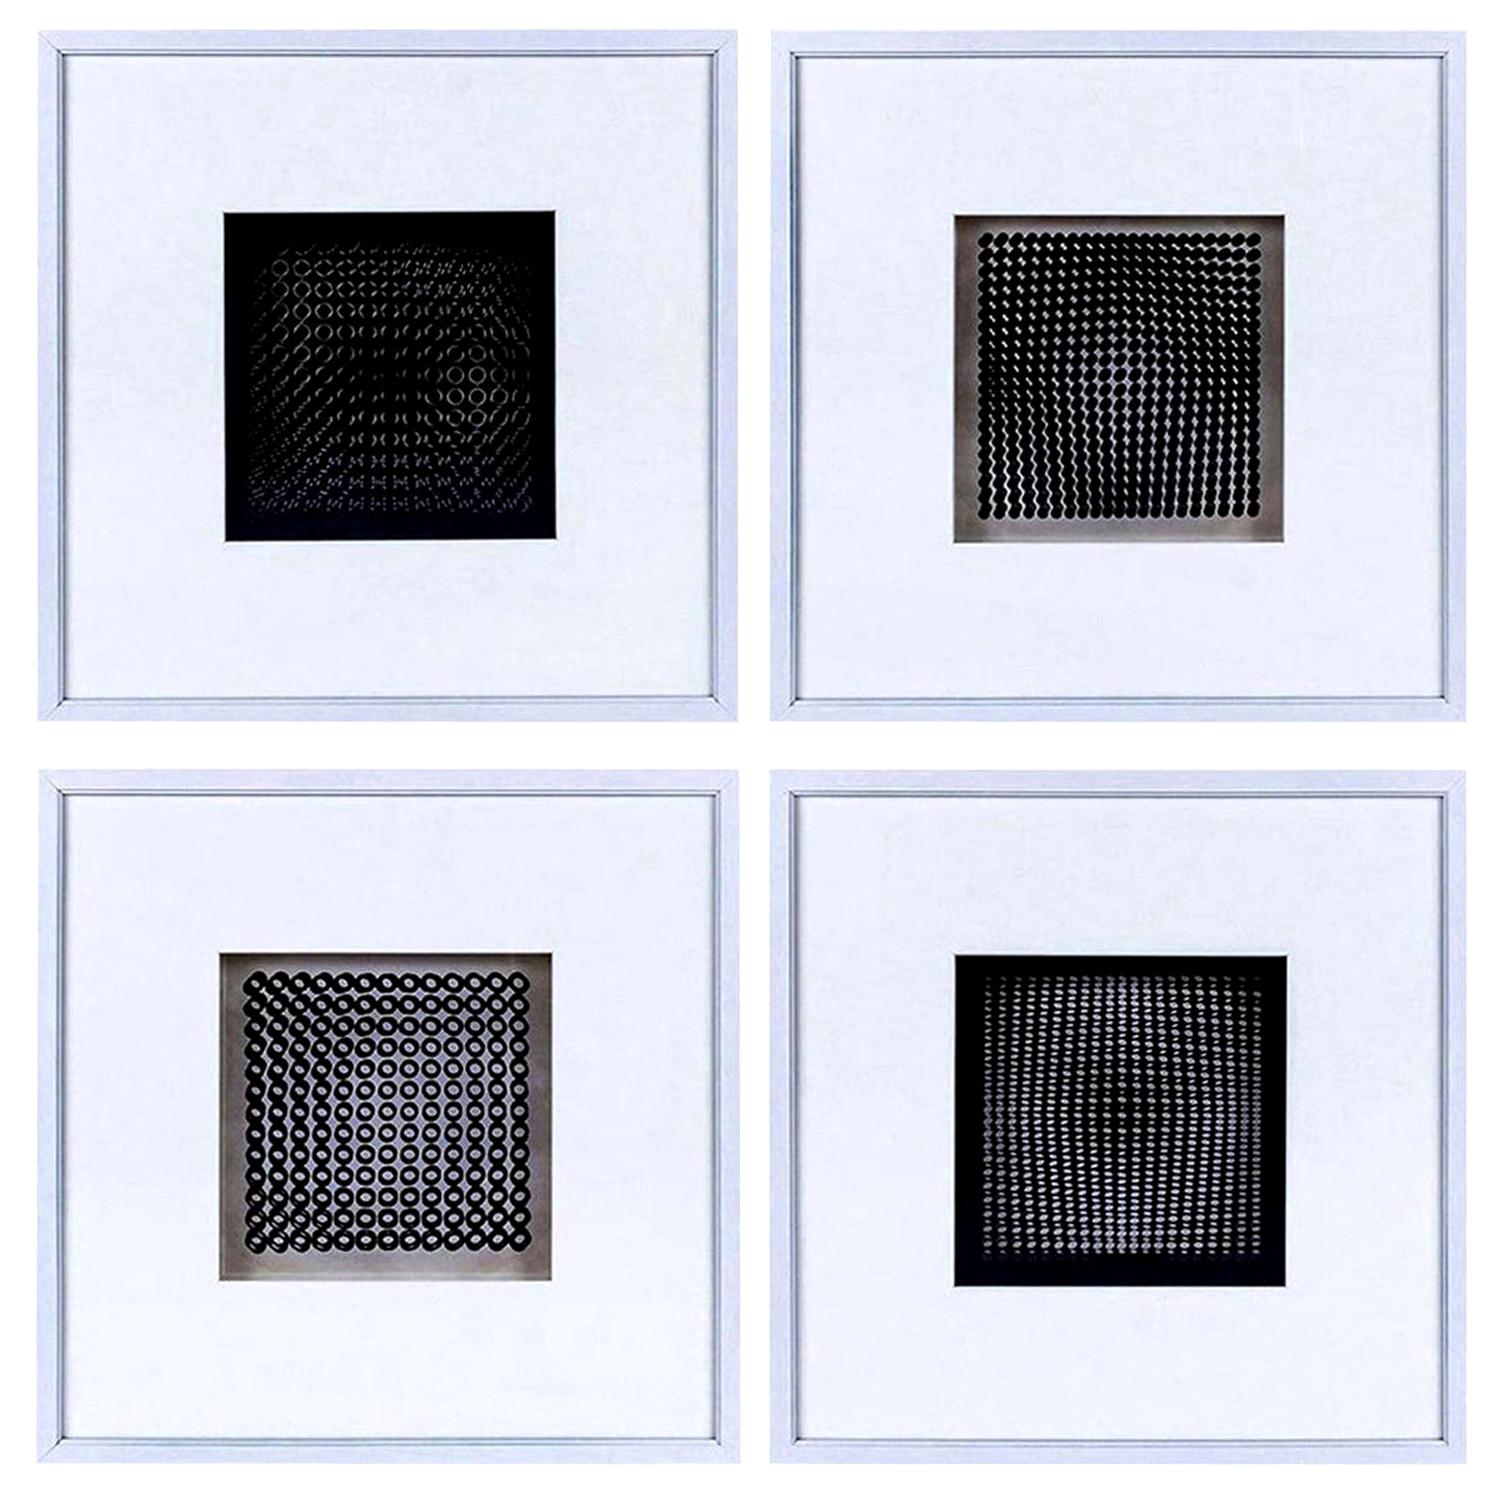 Hand-Crafted Four Vasarely Prints, Oeuvres Profondes